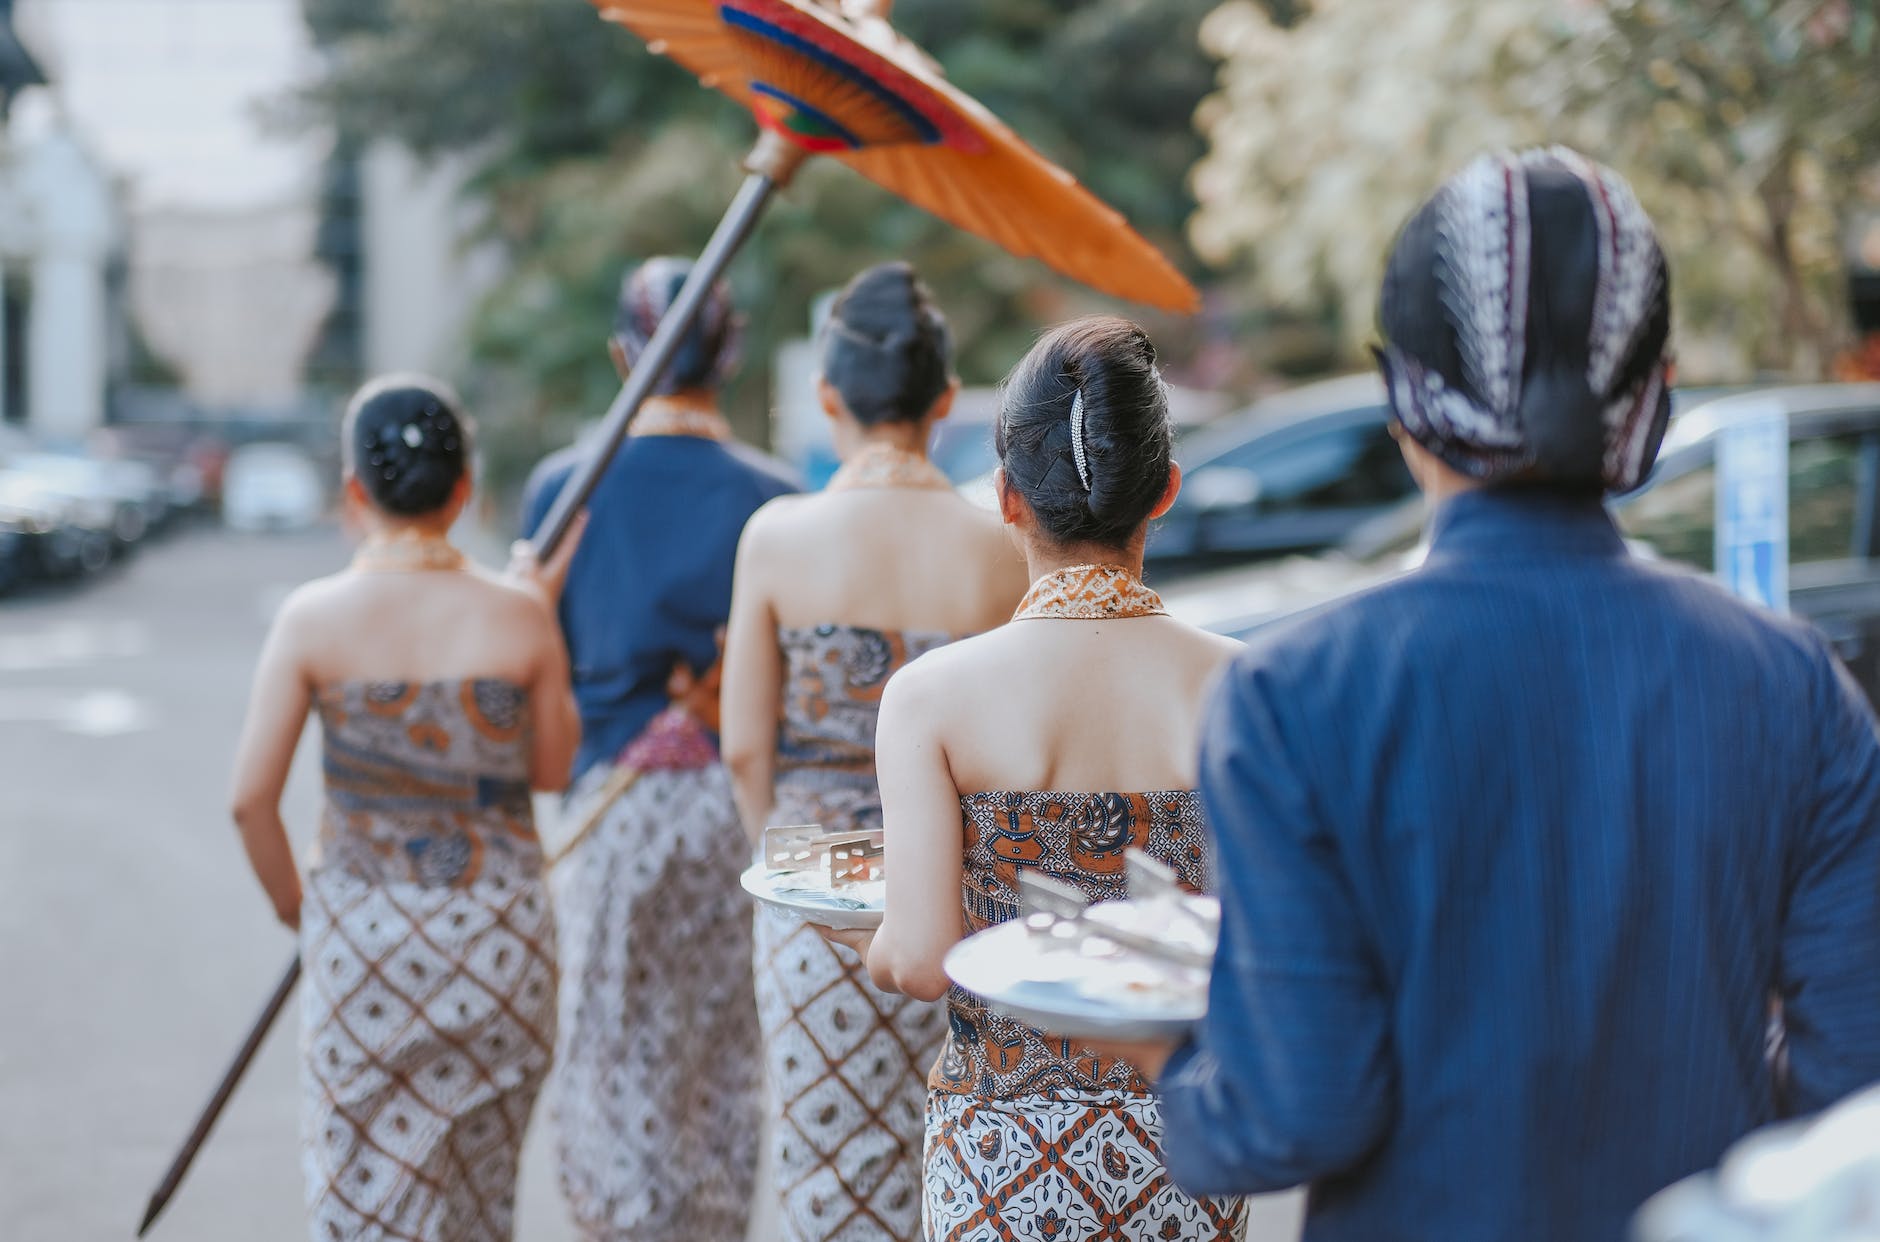 people wearing traditional dress